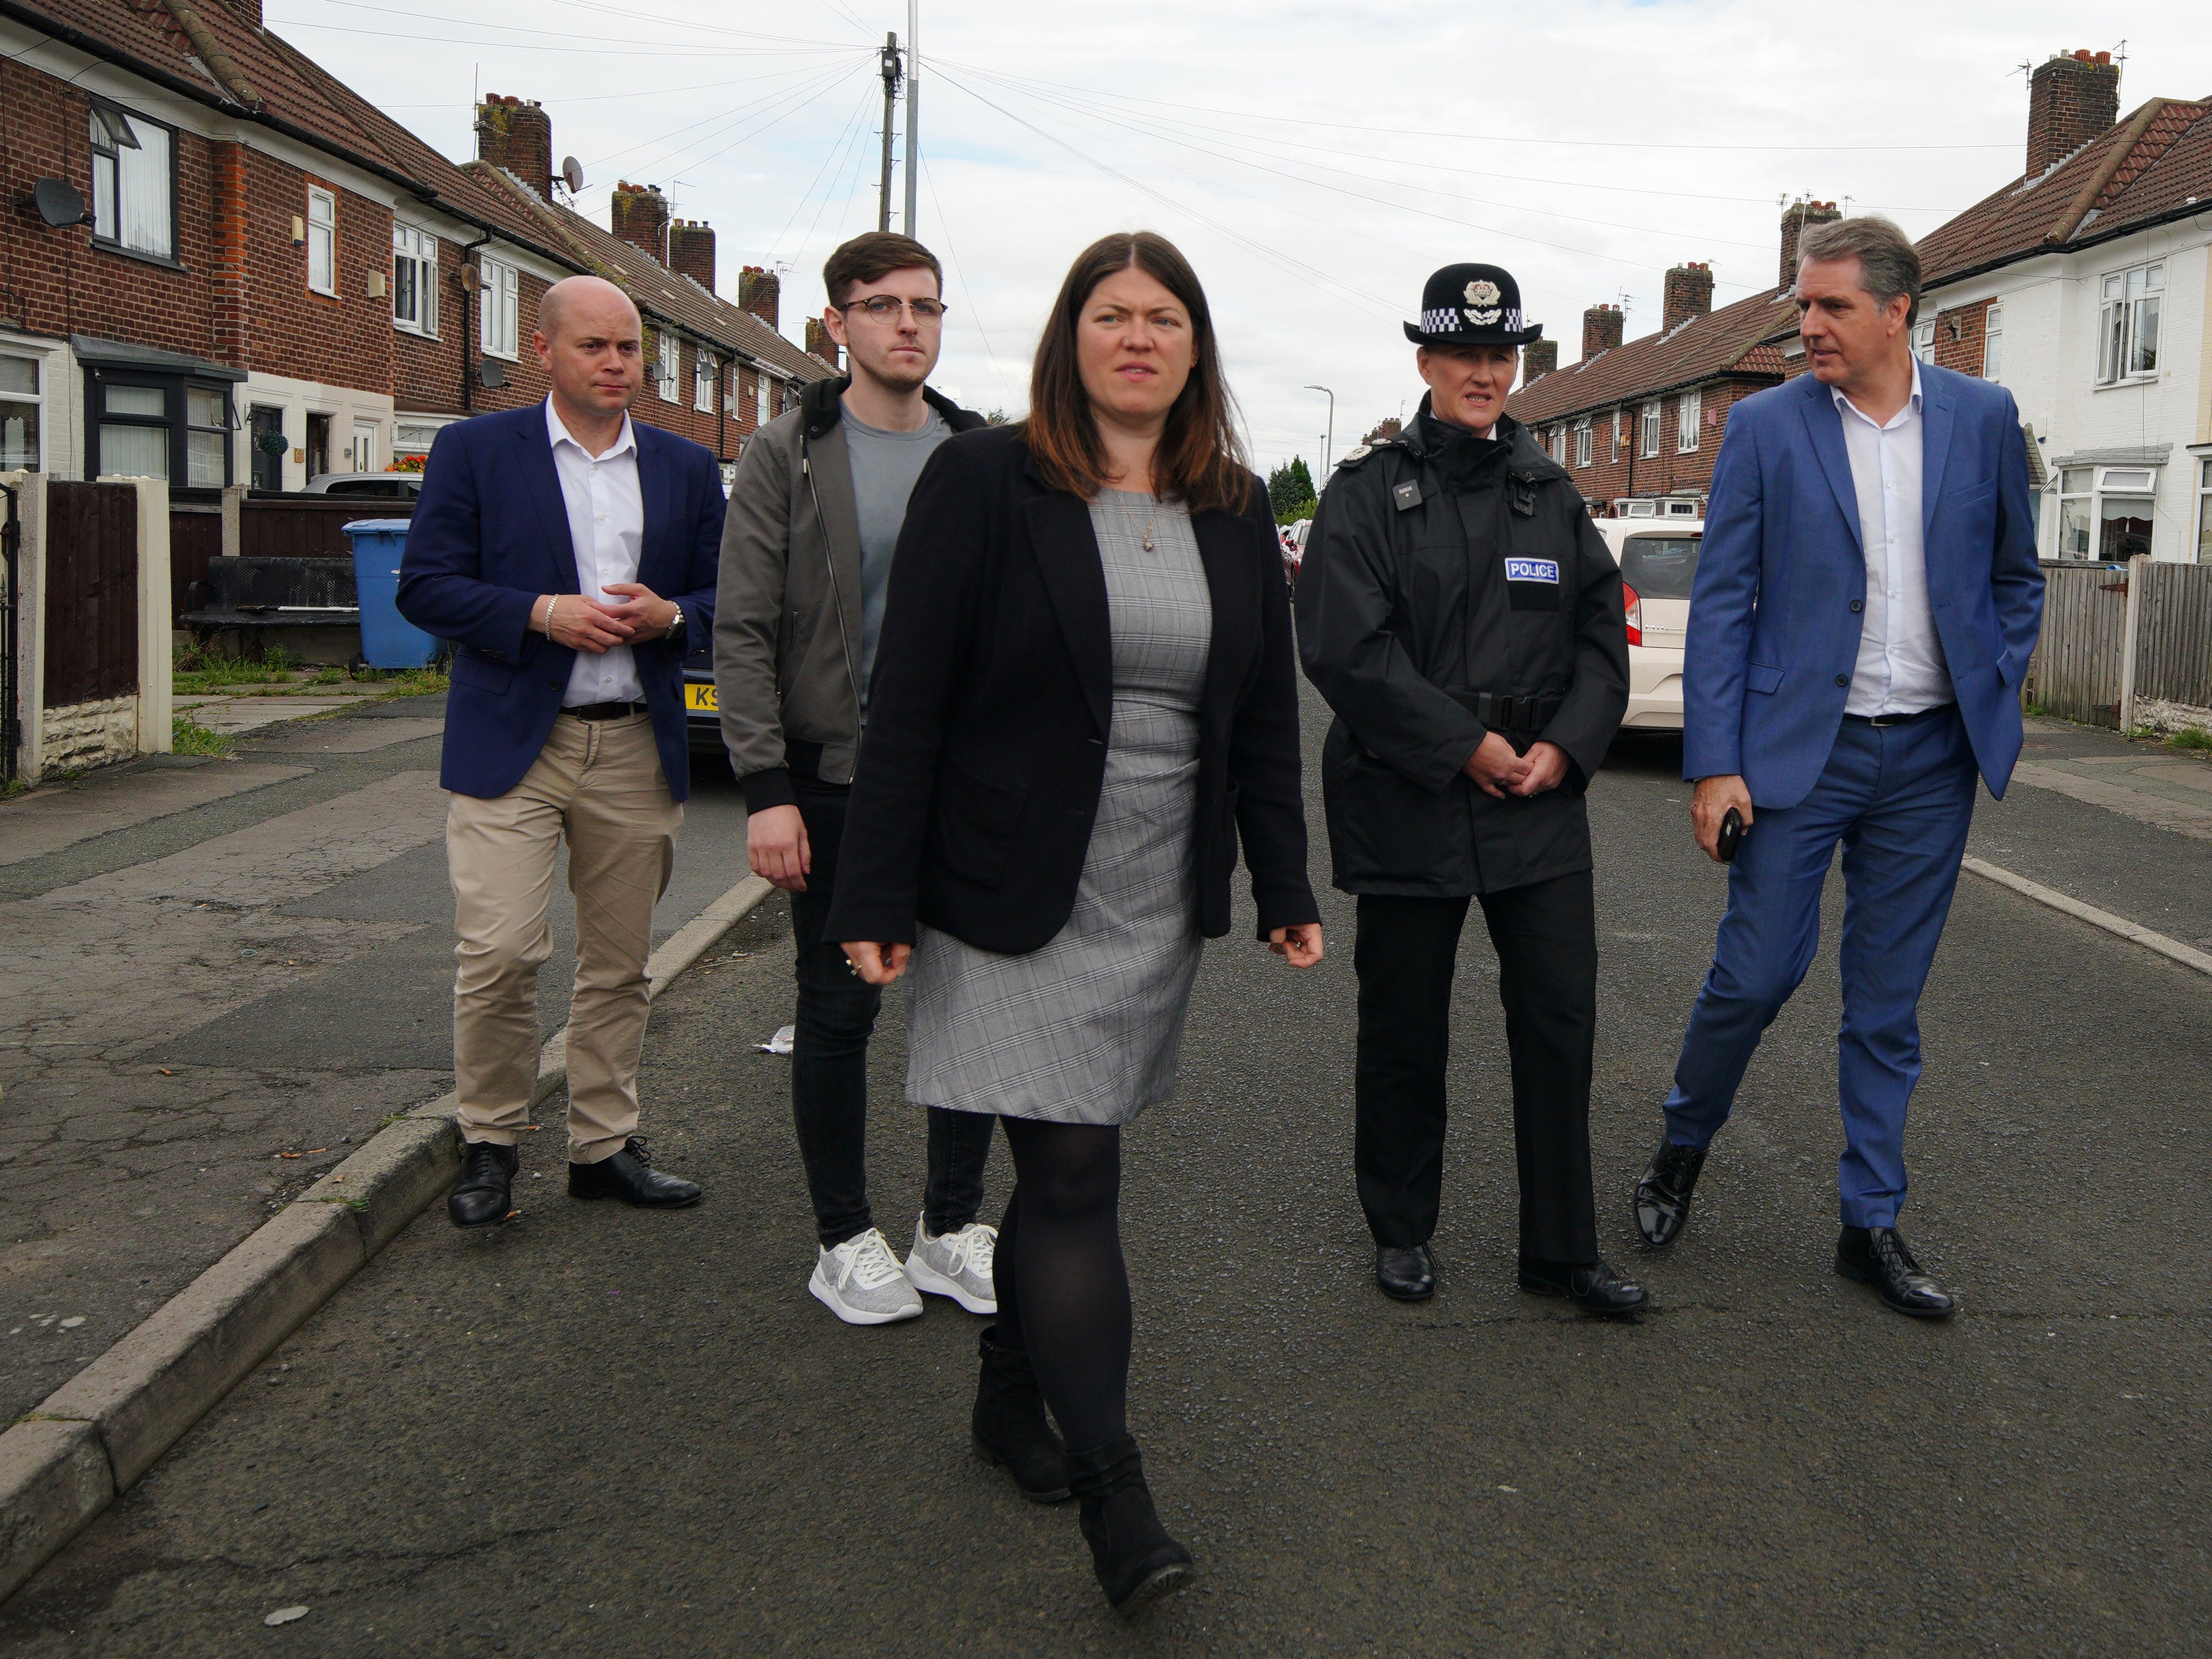 Chief Constable Serena Kennedy from Merseyside Police, with Metro Mayor Steve Rotheram and Merseyside Police and Crime Commissioner Emily Spurrell in Kingsheath Avenue, Knotty Ash, Liverpool, where nine-year-old Olivia Pratt-Korbel was fatally shot on Monday night (Peter Byrne/PA)